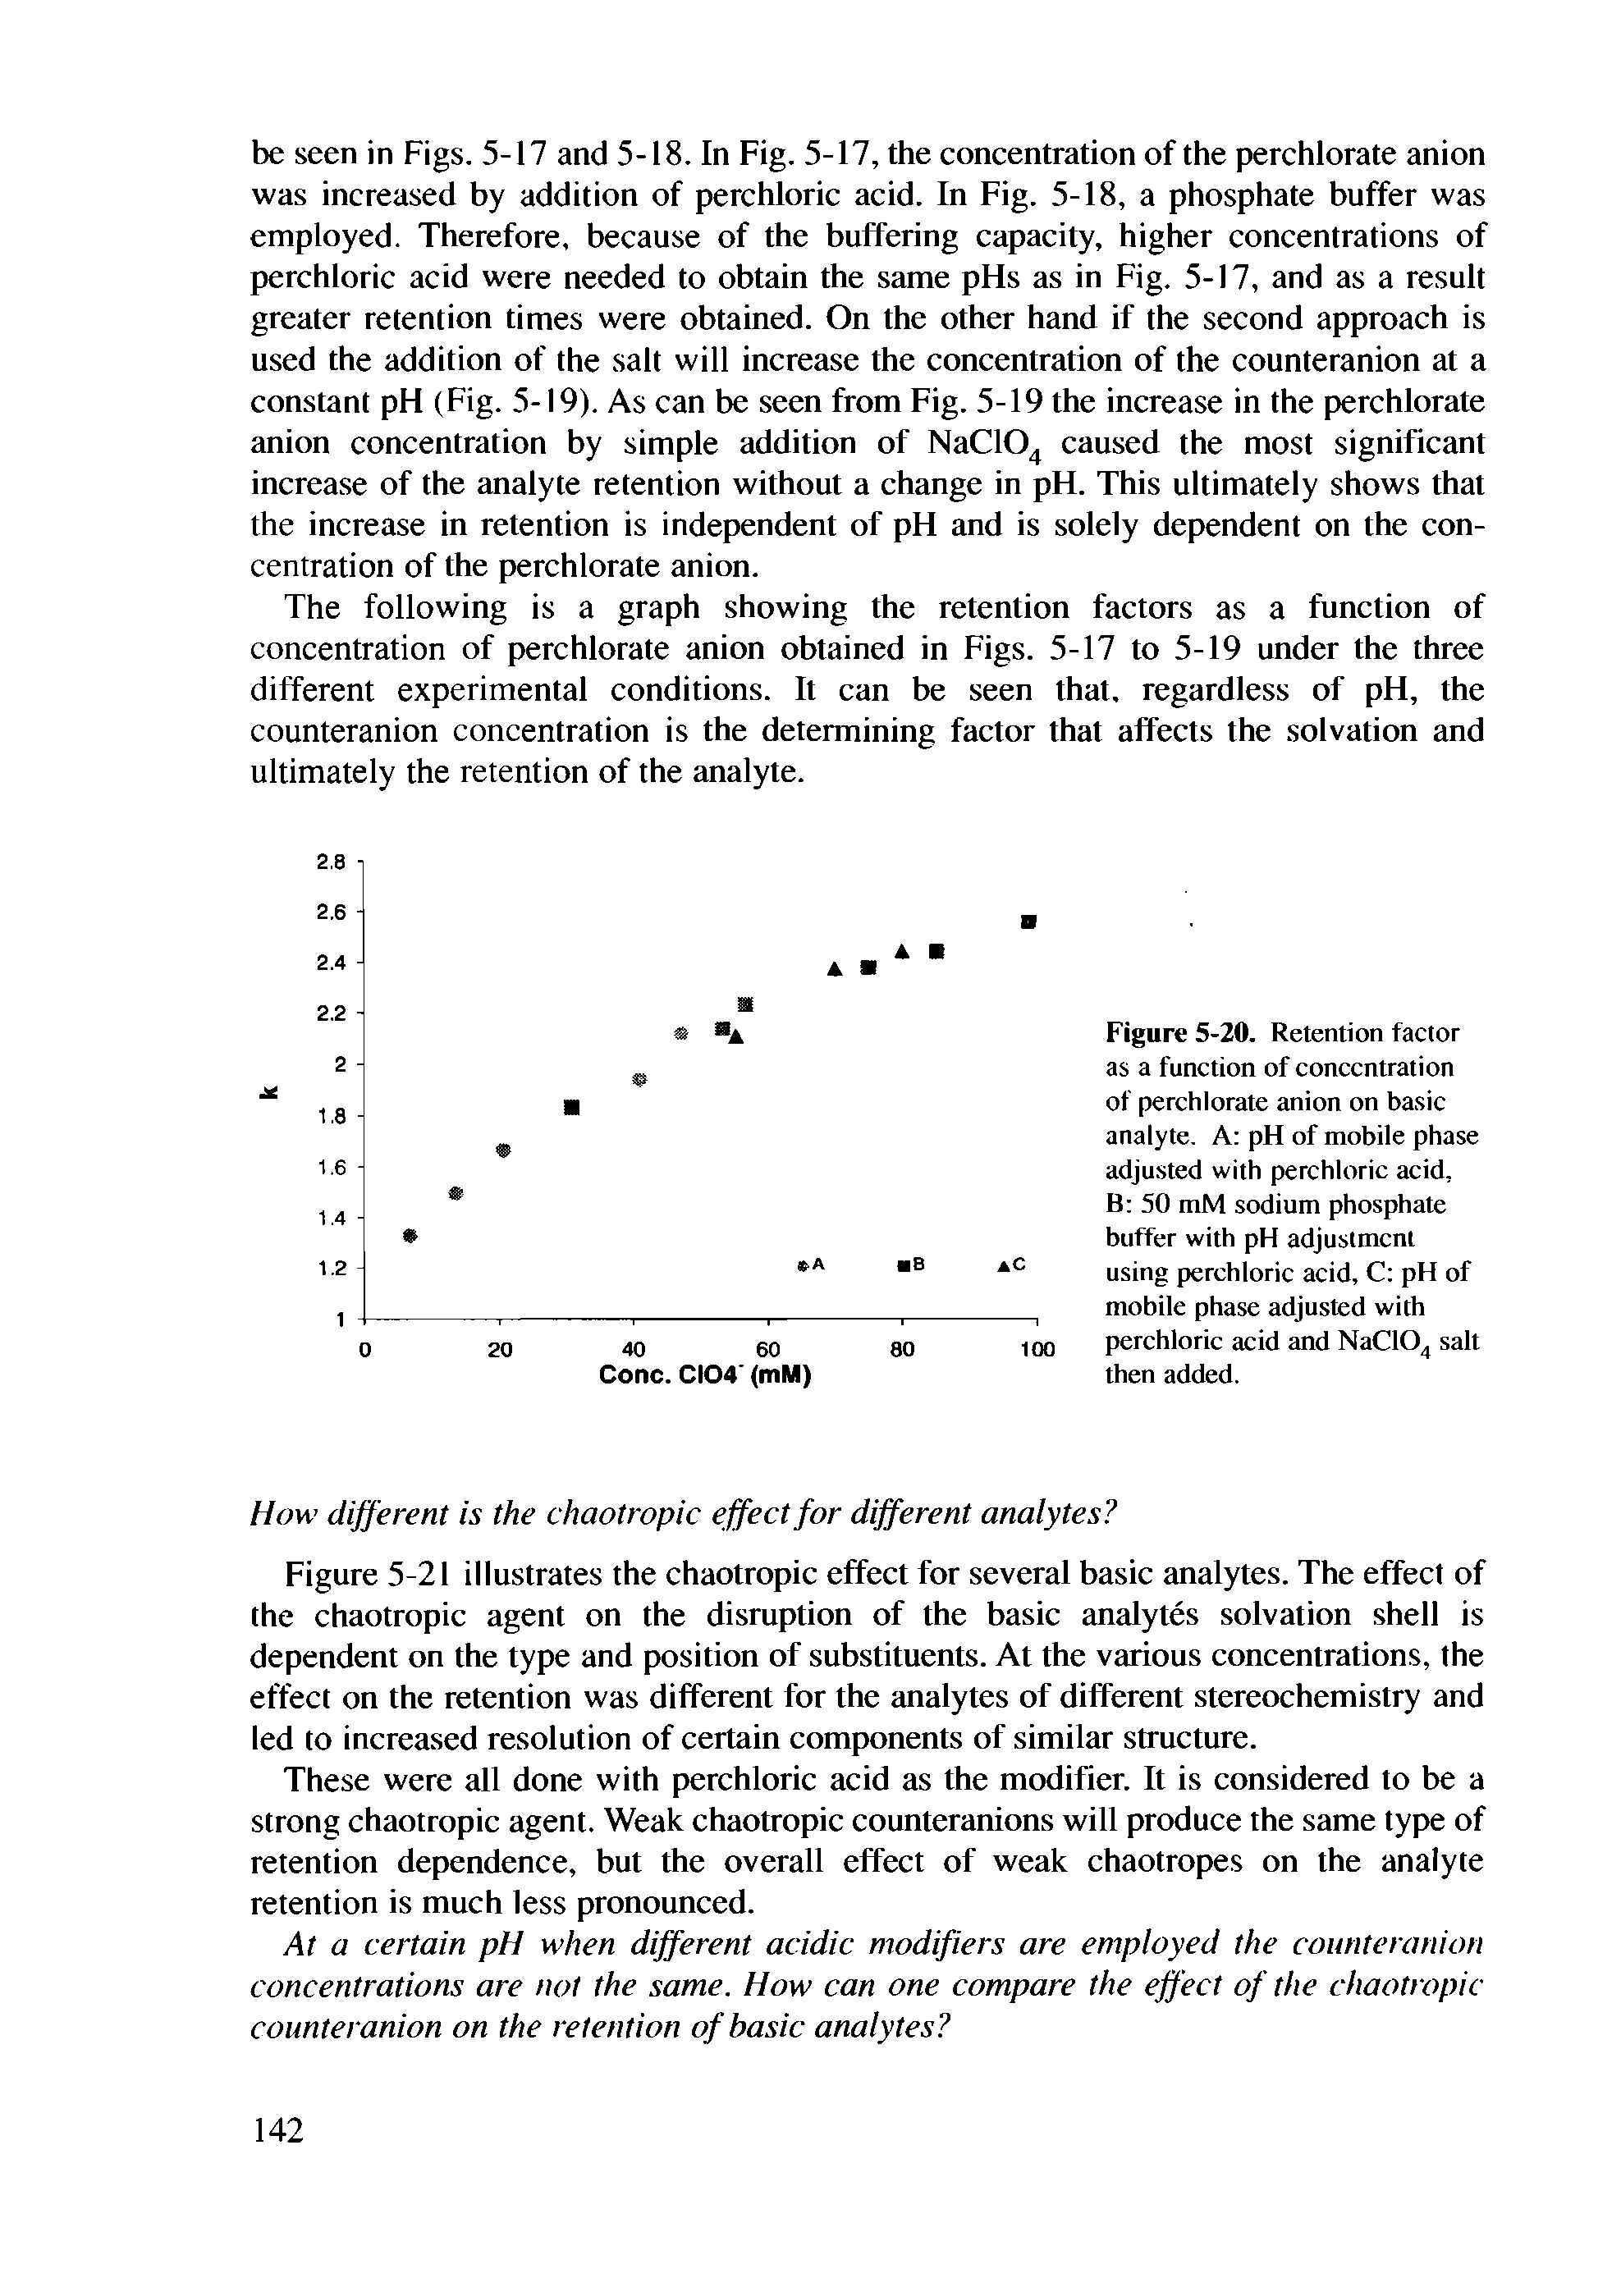 Figure 5-20. Retention factor as a function of concentration of perchlorate anion on basic analyte. A pH of mobile phase adjusted with perchloric acid,...